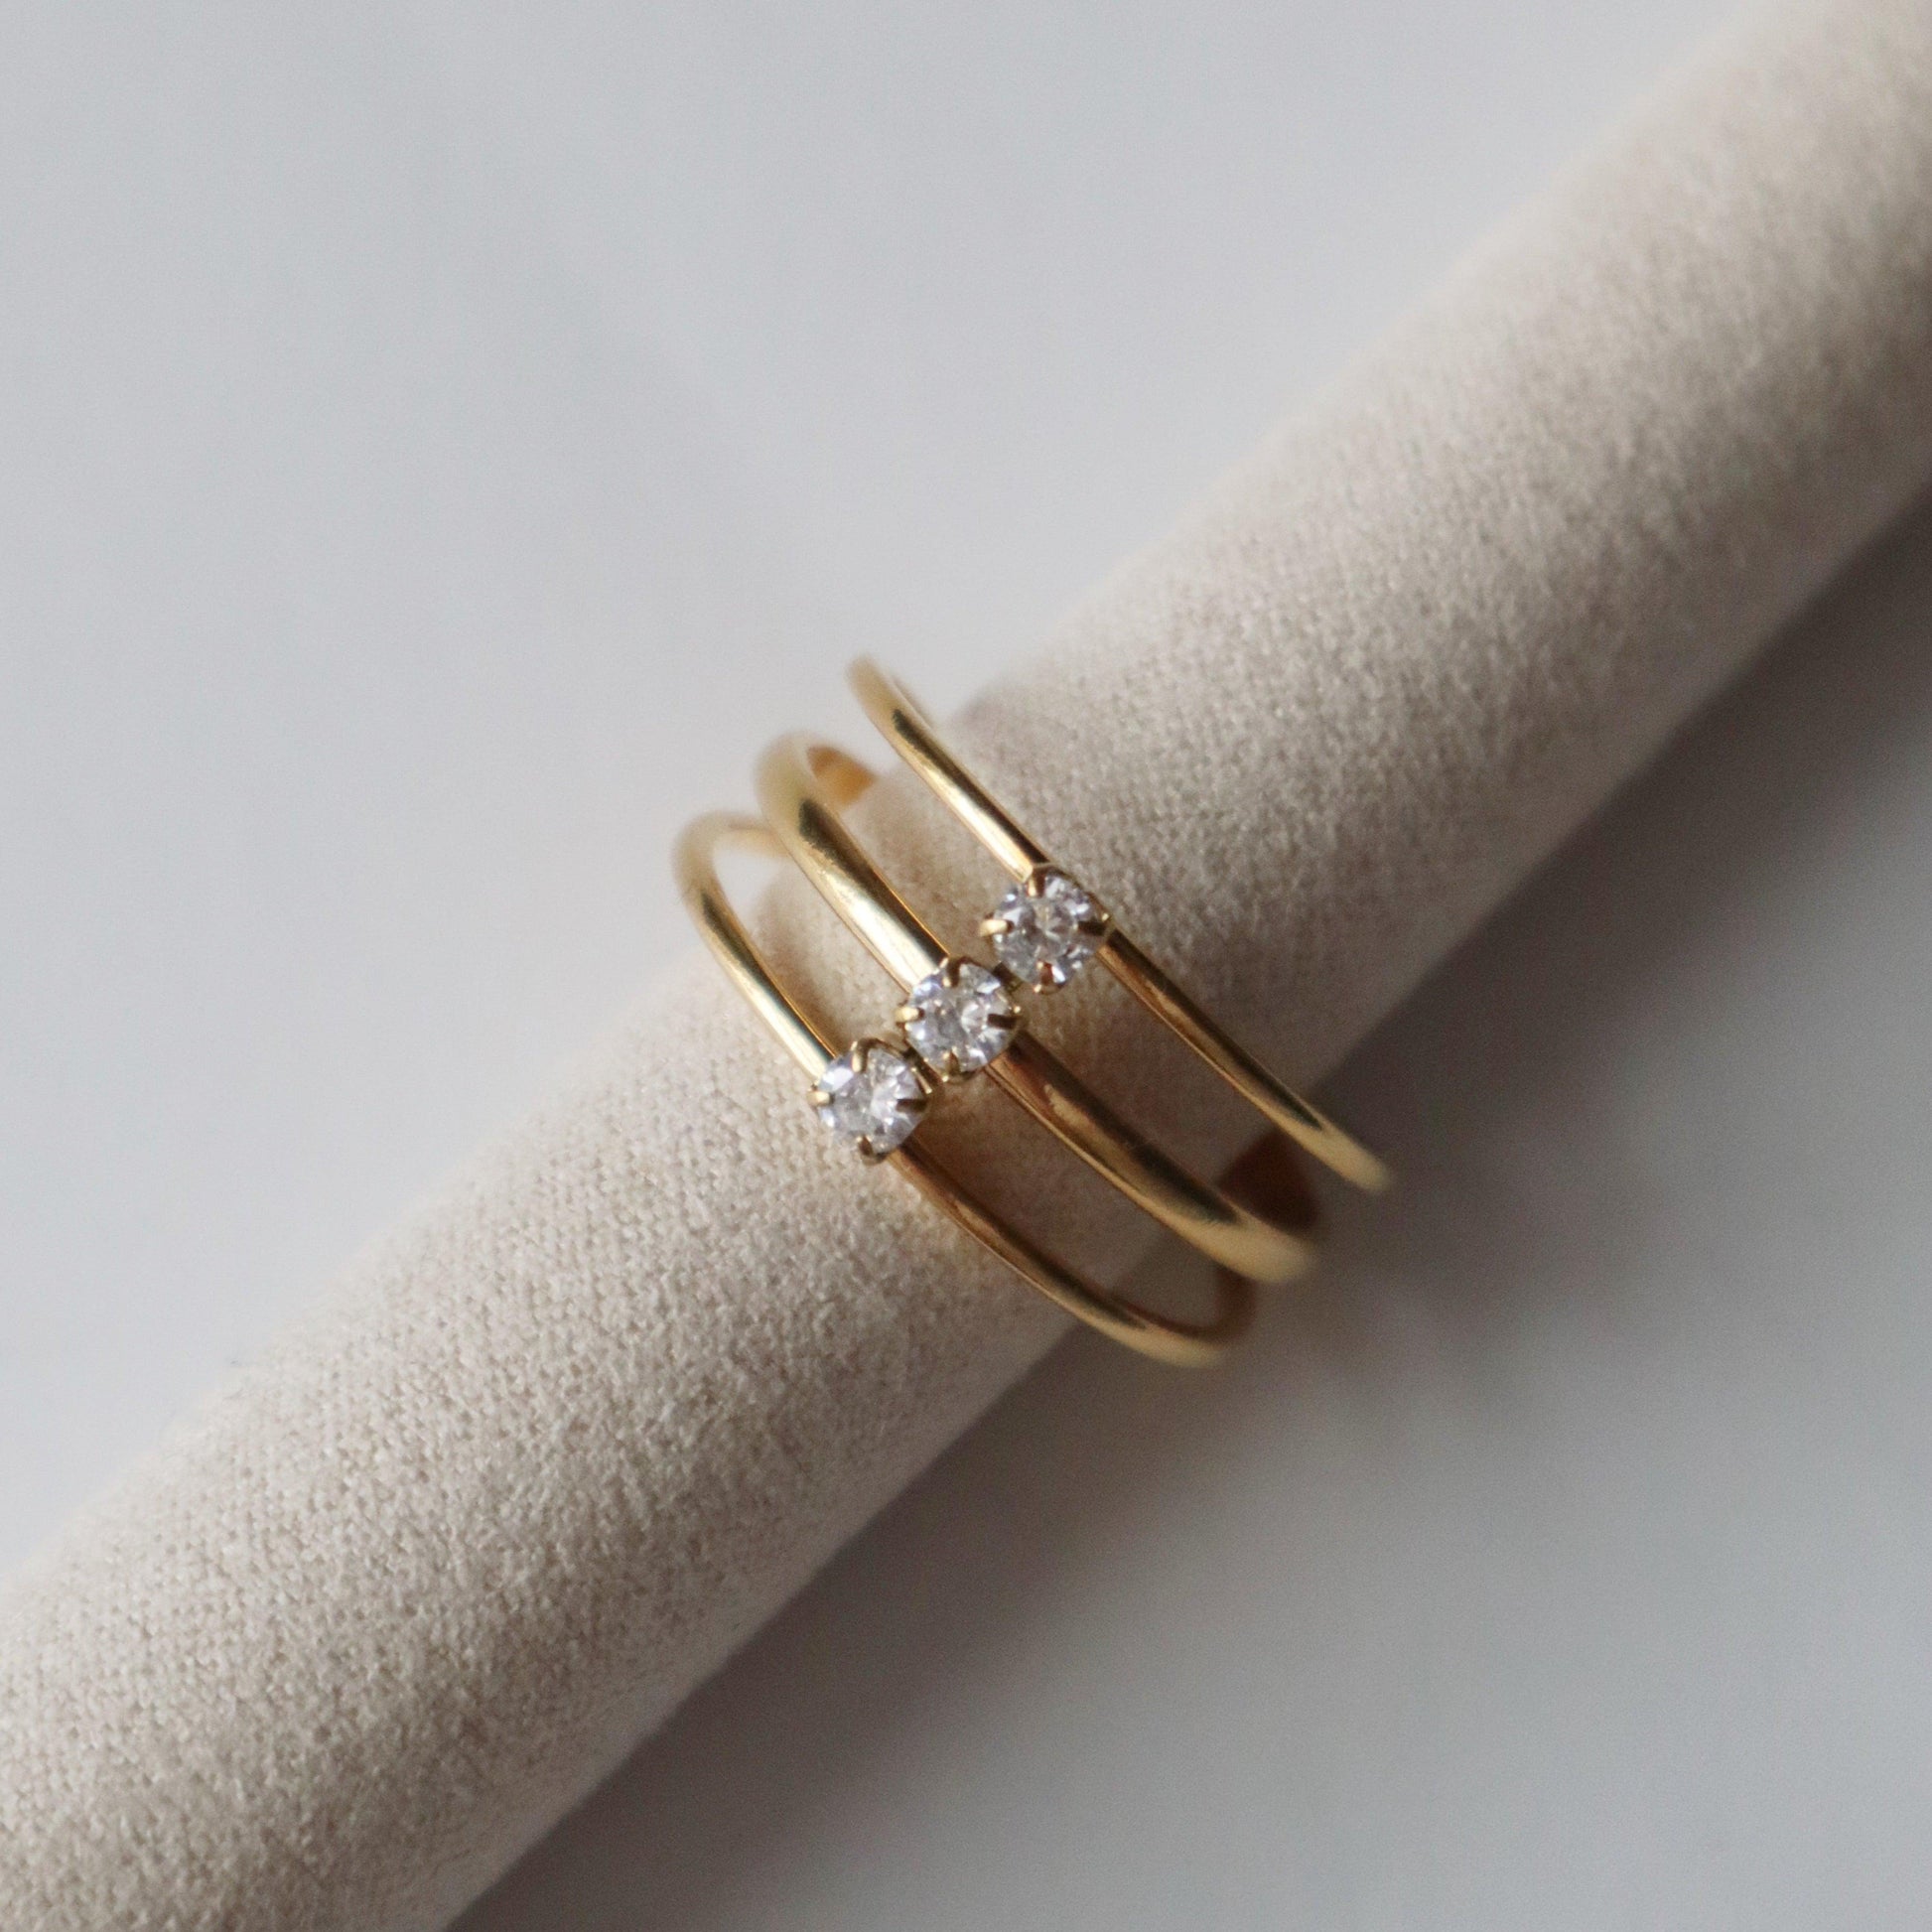 Noelle Ring | Adjustable Ring - JESSA JEWELRY | GOLD JEWELRY; dainty, affordable gold everyday jewelry. Tarnish free, water-resistant, hypoallergenic. Jewelry for everyday wear